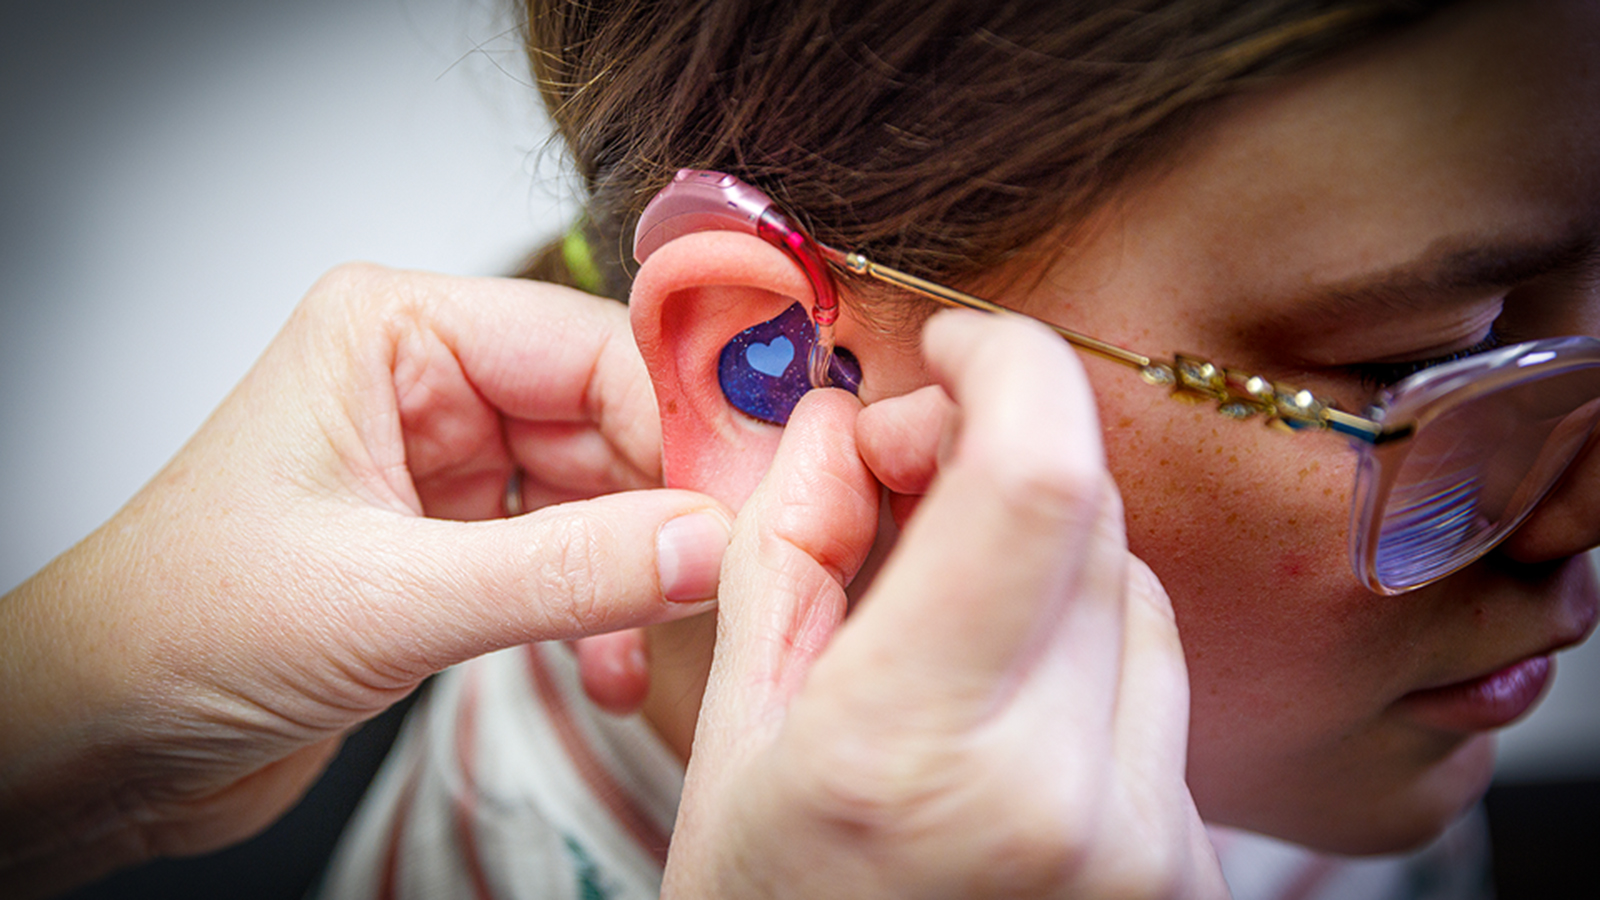 Audiologist Stacie Ray checks the ears and hearing aids of 13-year-old Chloie Lechance.